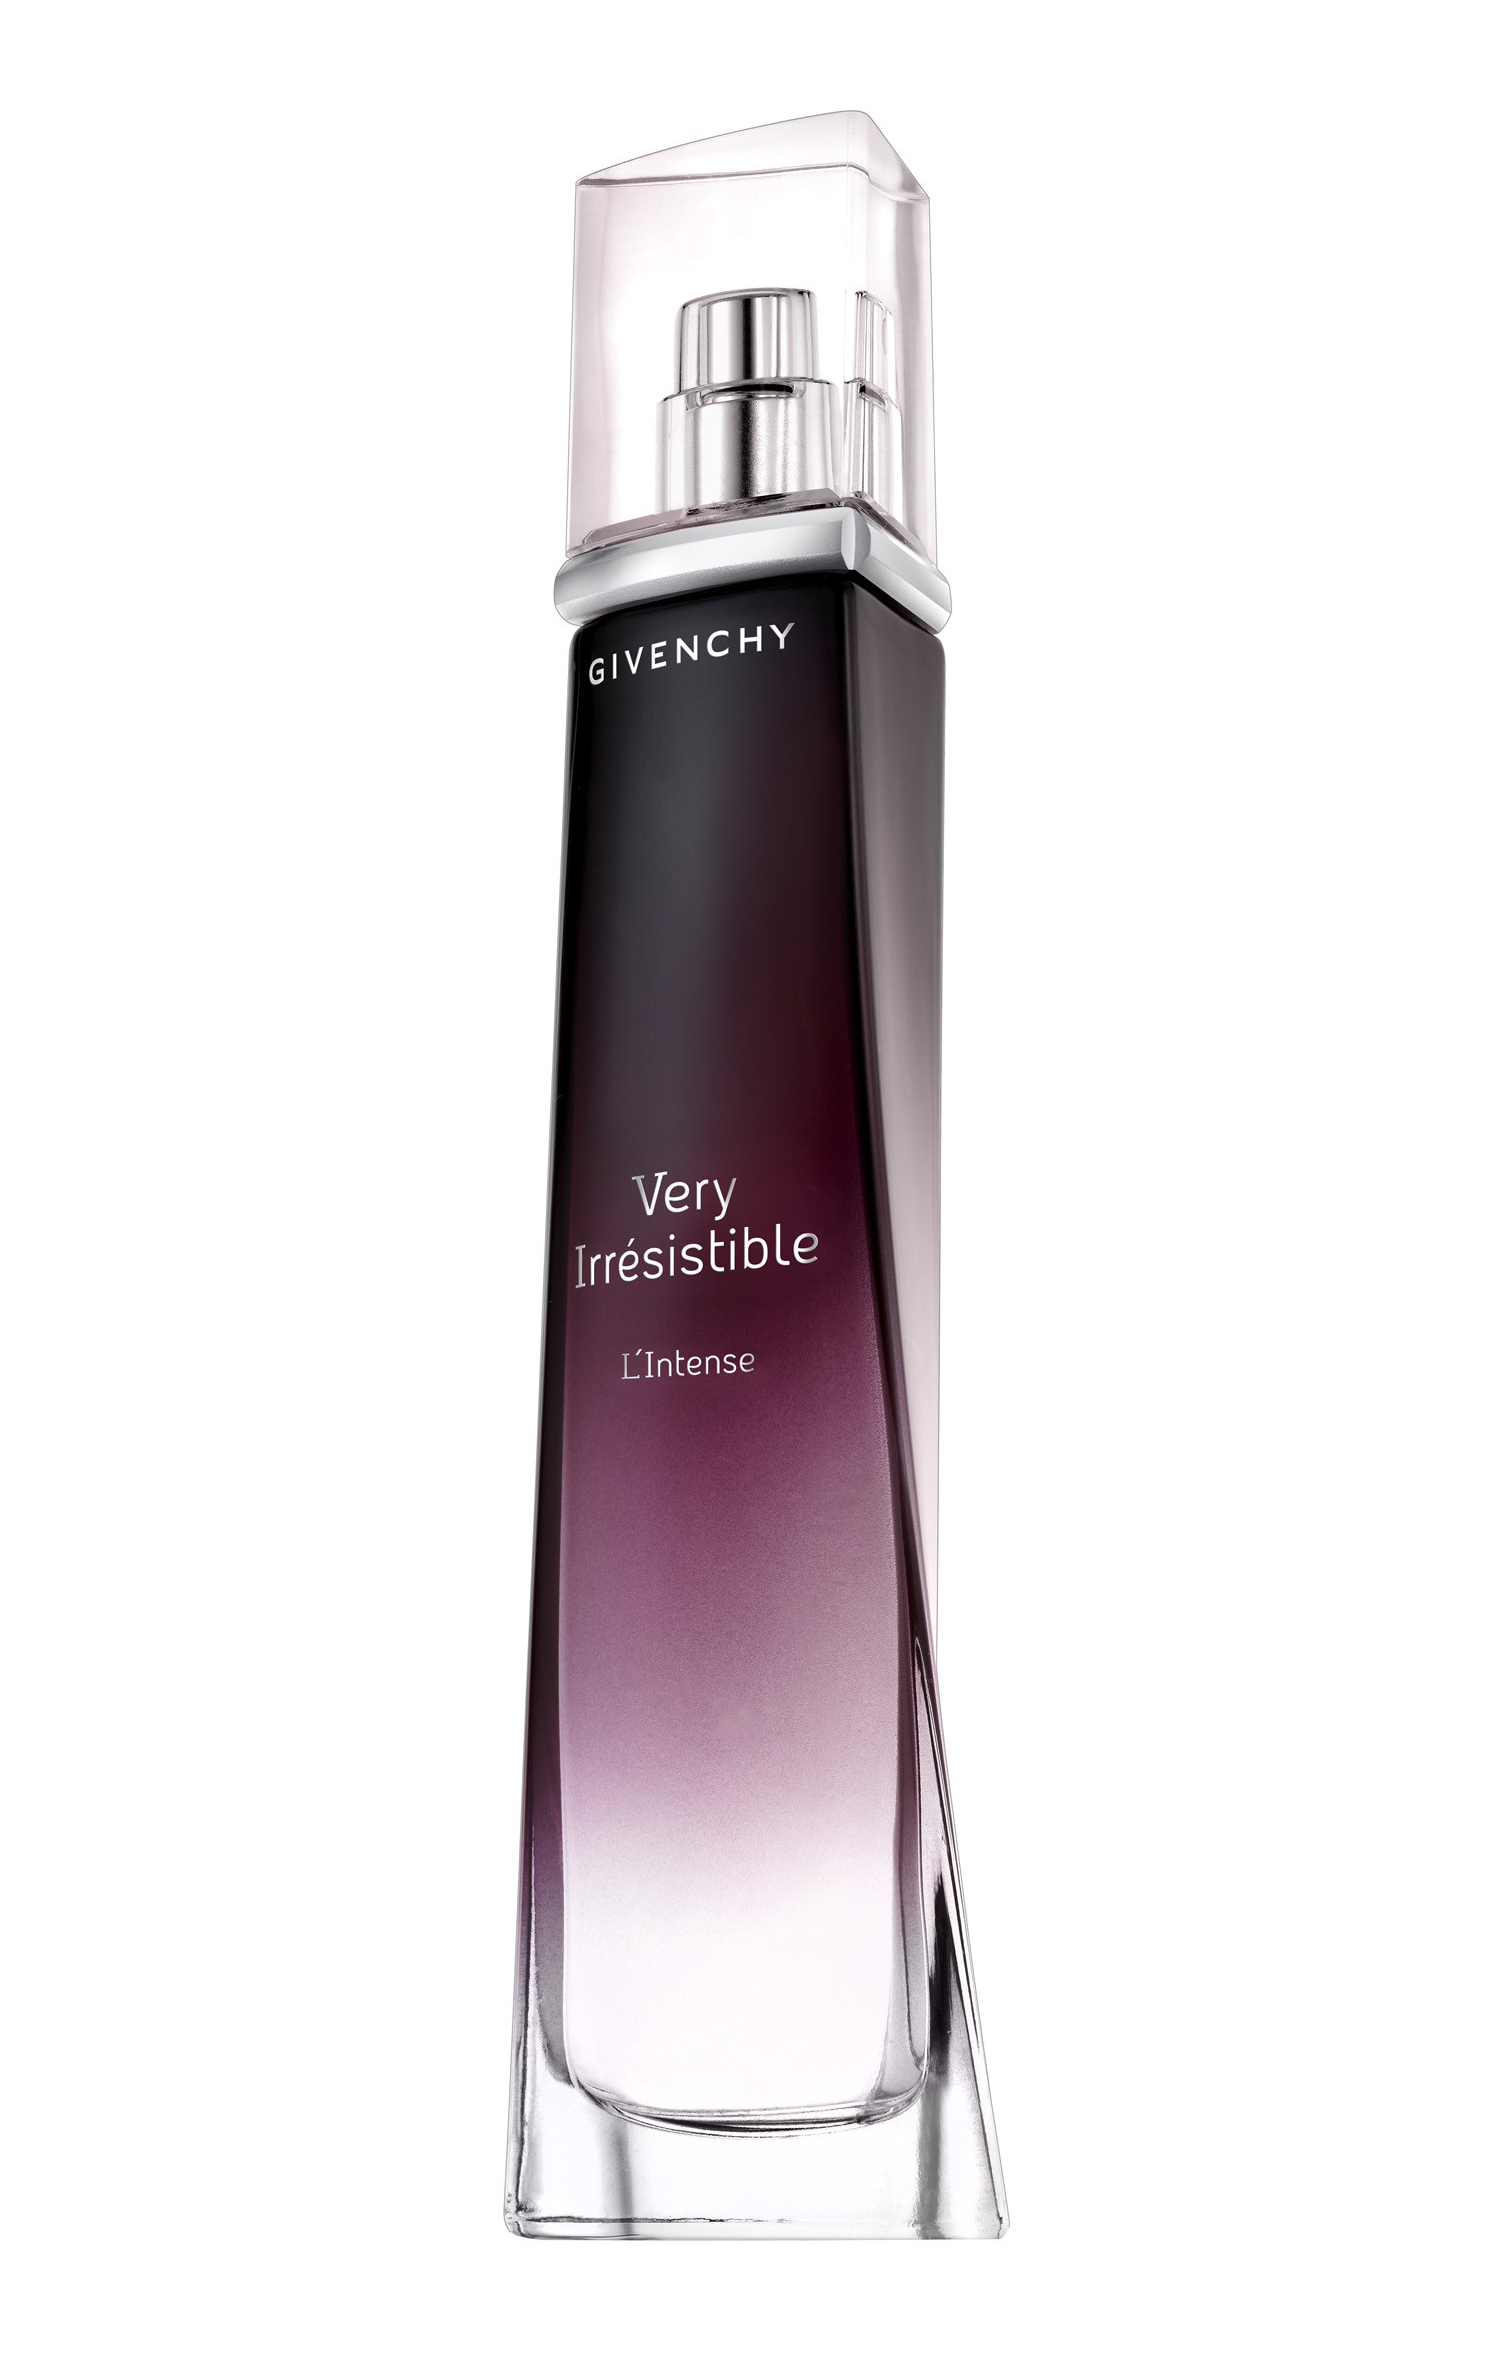 very irresistible by givenchy